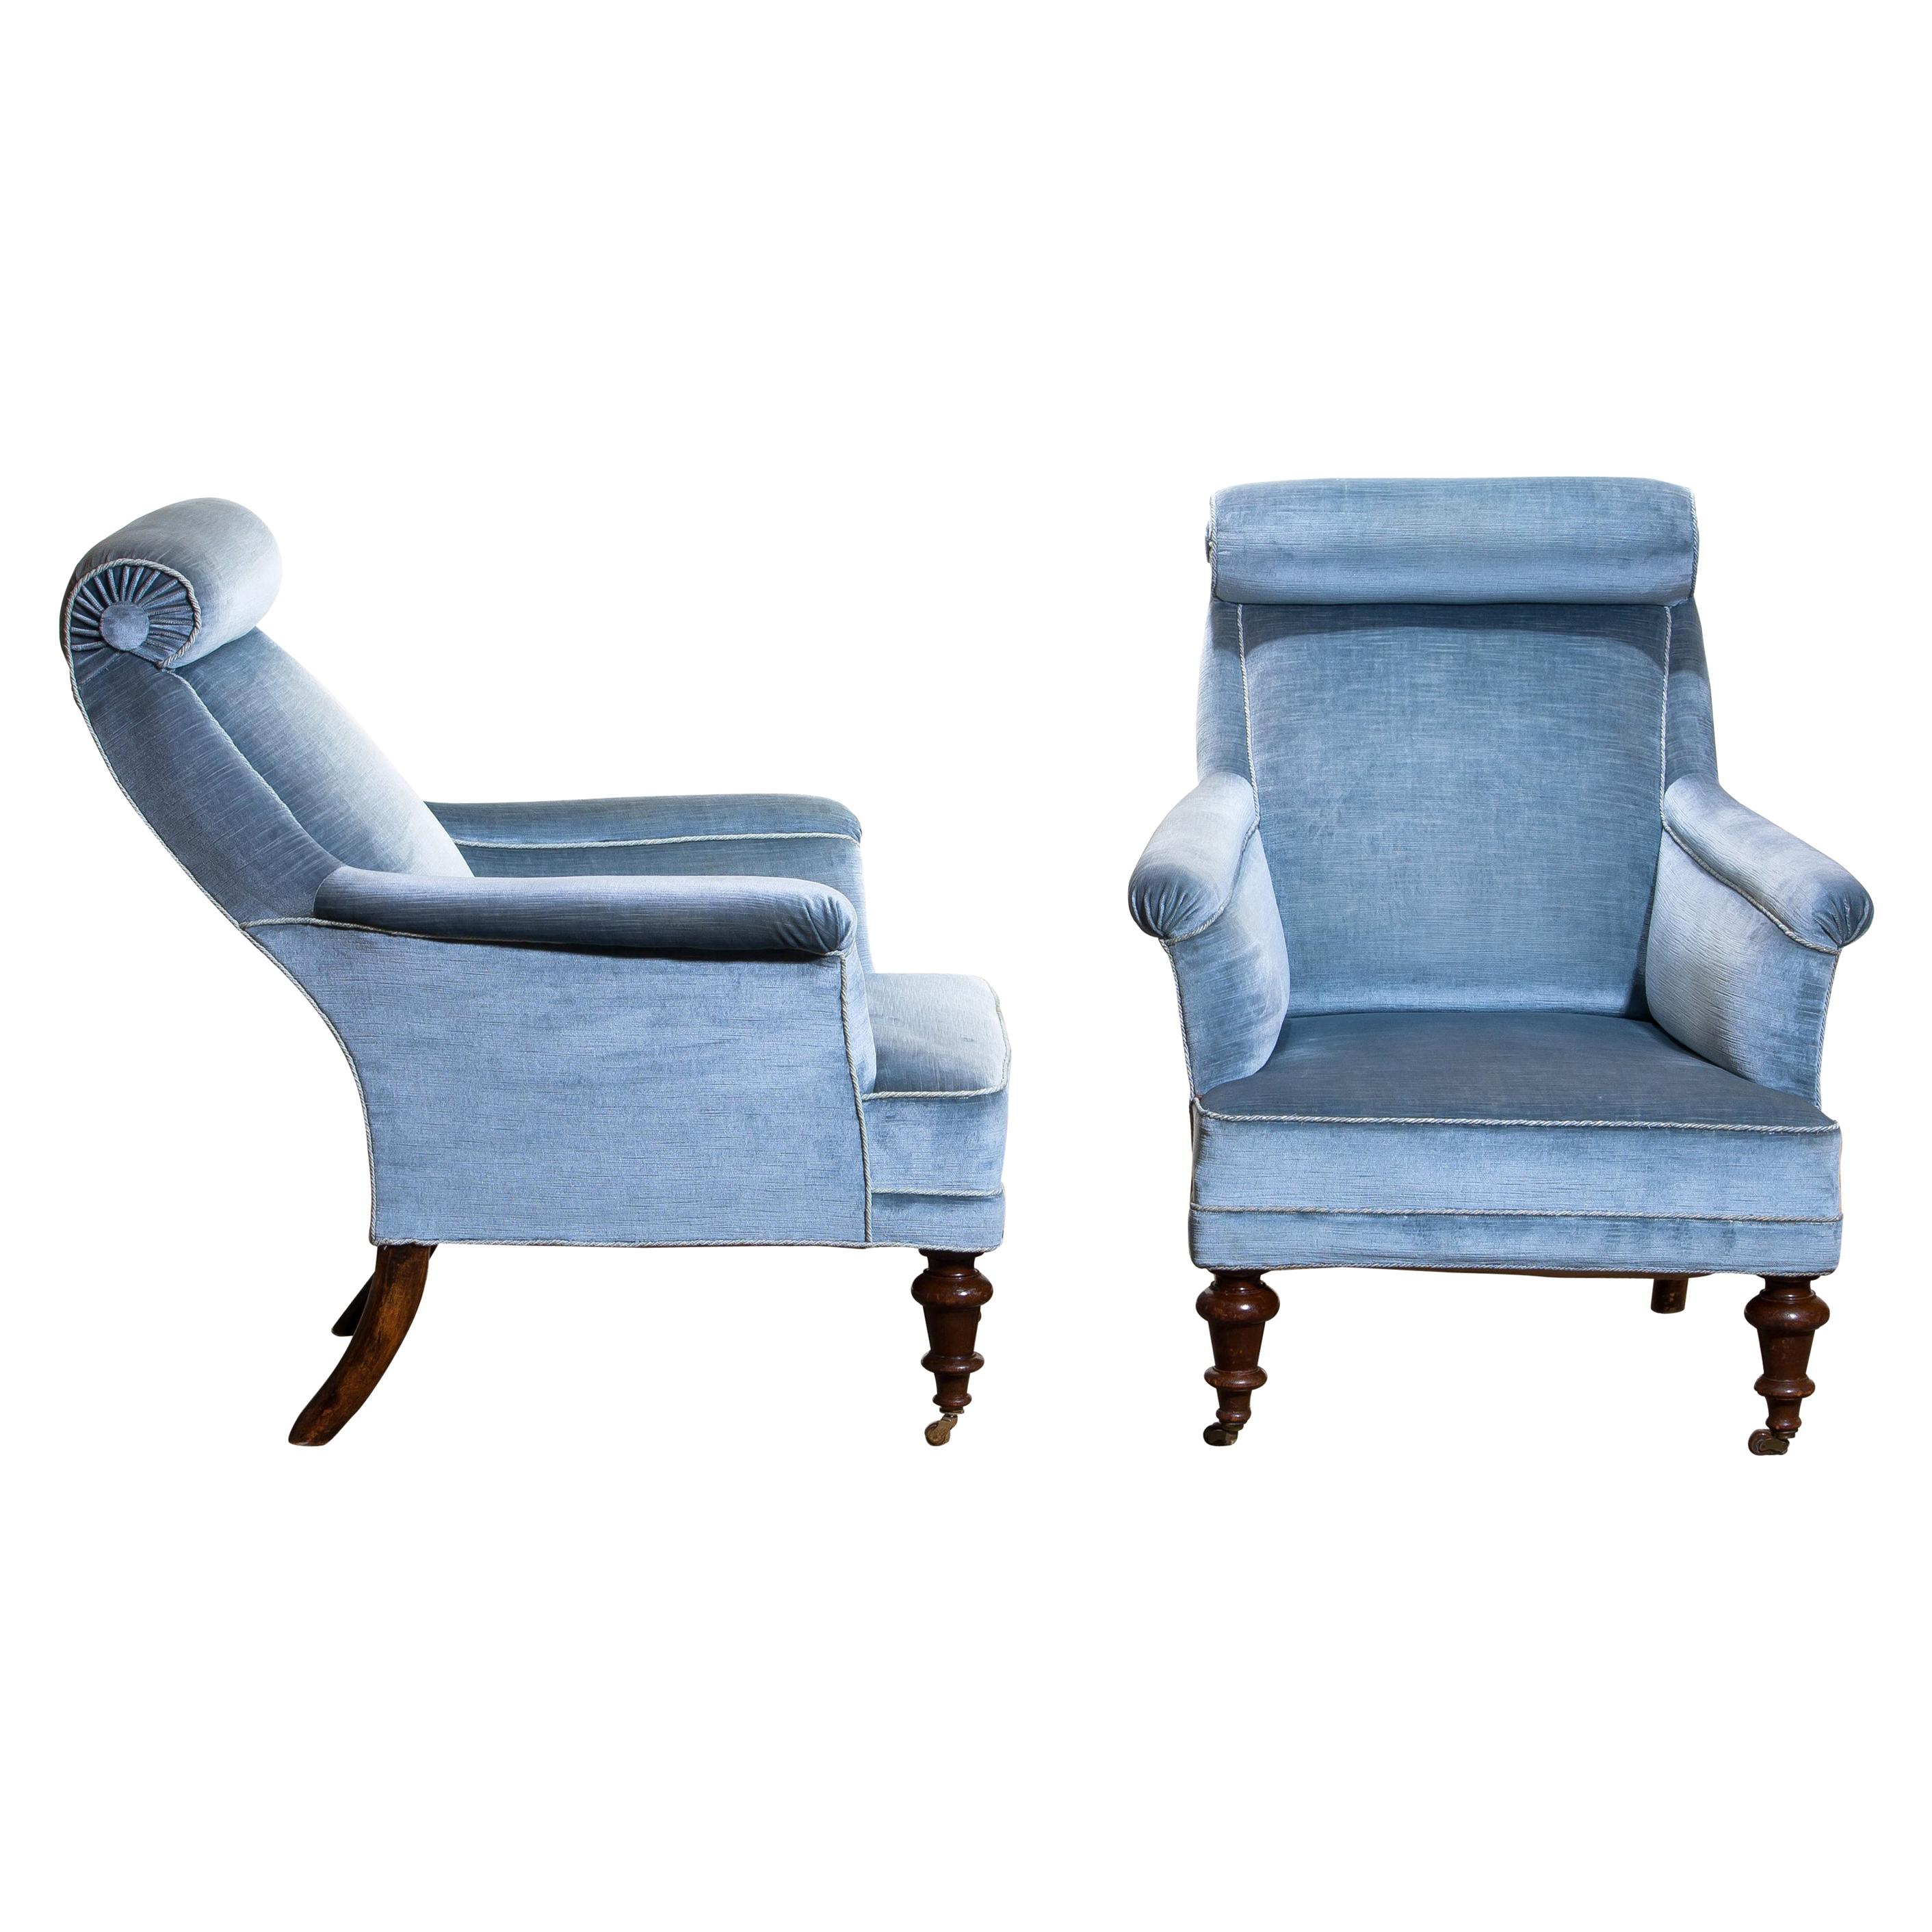 1900s Set of Two Ice Blue Velvet Dorothy Draper Style Bergère Club Lounge Chairs In Good Condition In Silvolde, Gelderland